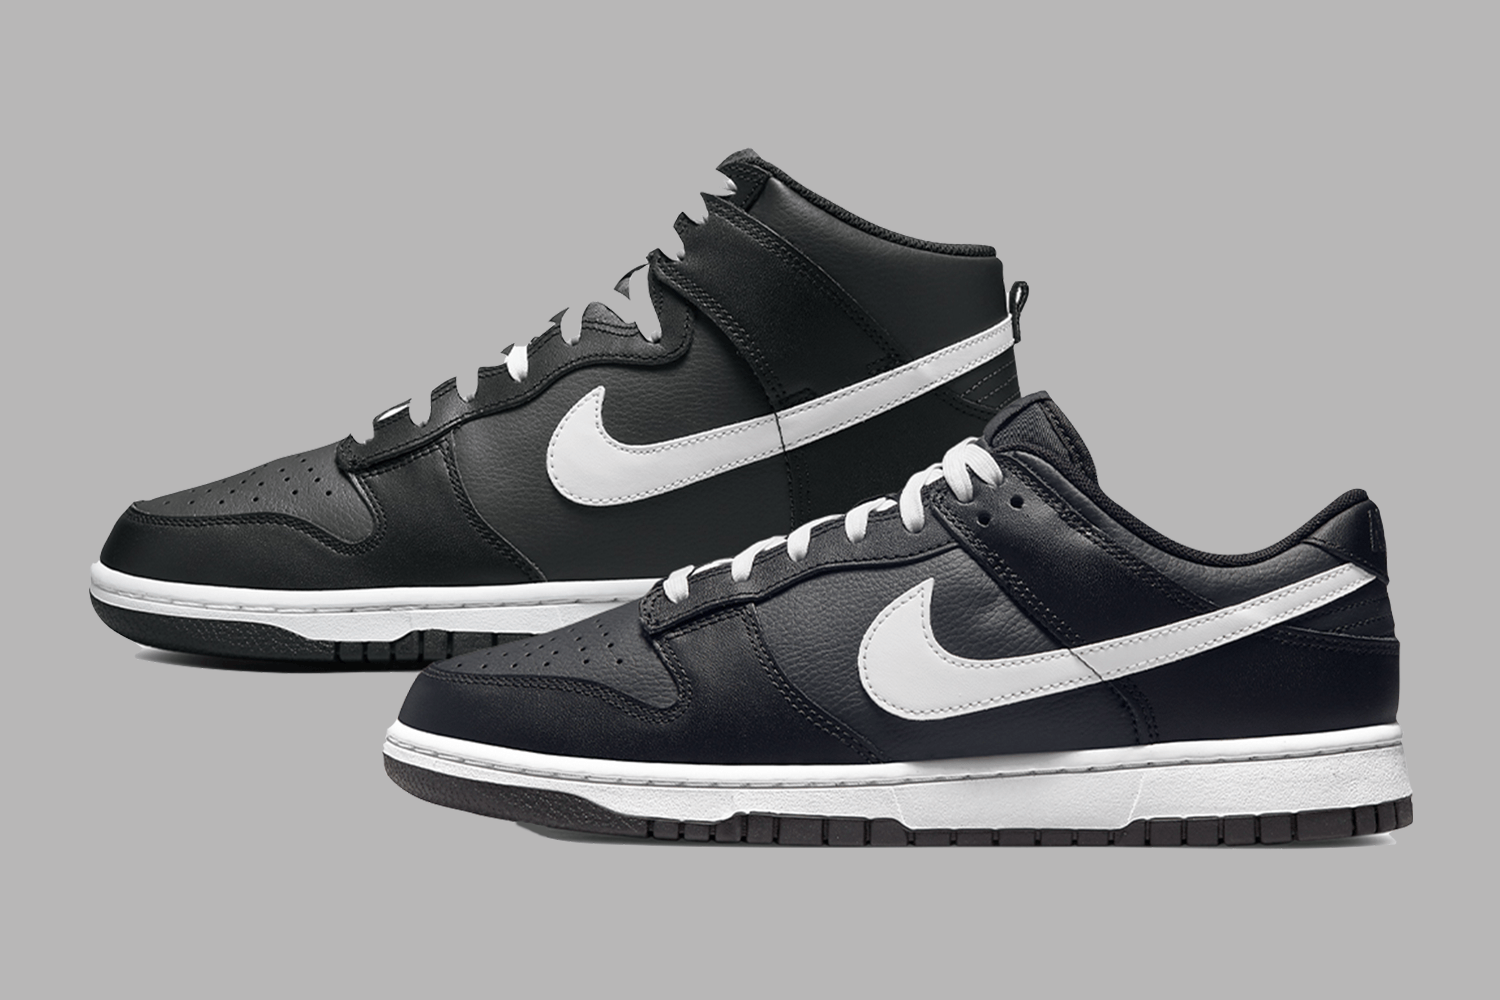 The Nike Dunk Low & High will drop in a 'Black Panda' colorway